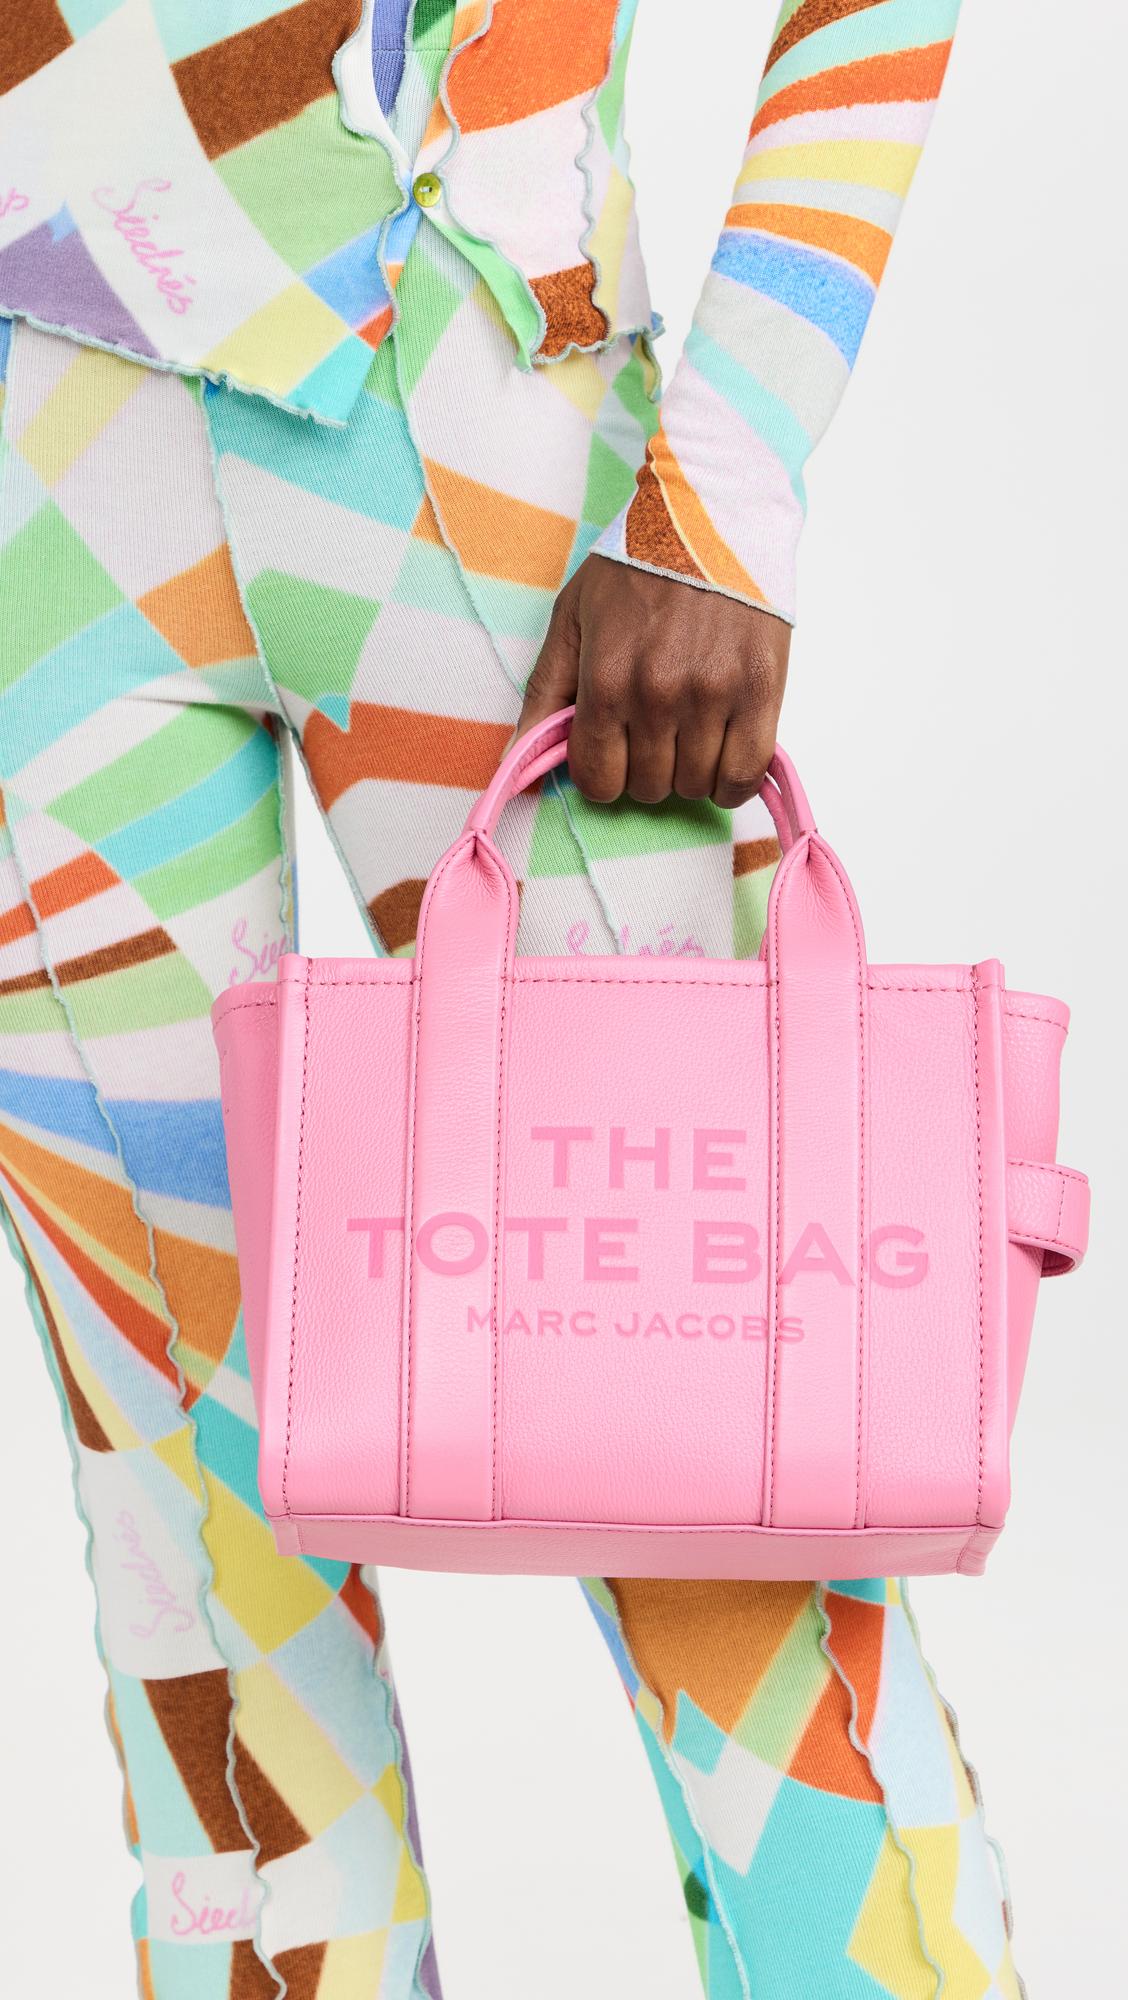 Marc Jacobs The Tote Bag Mini Tote Bag Leather Pink